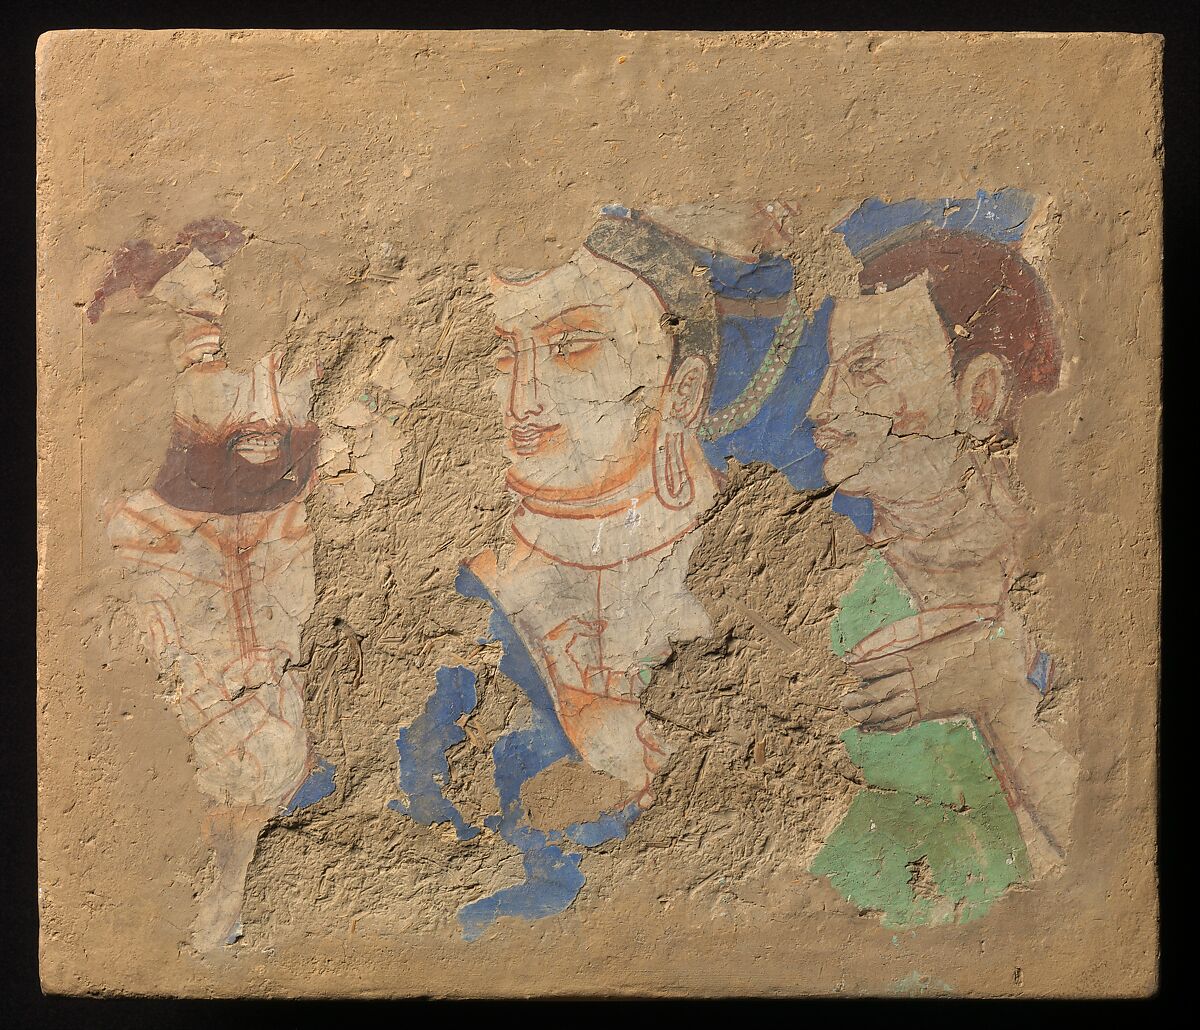 Buddha with Two Disciples, Pigments on mud plaster, China (Xinjiang Uyghur Autonomous Region)